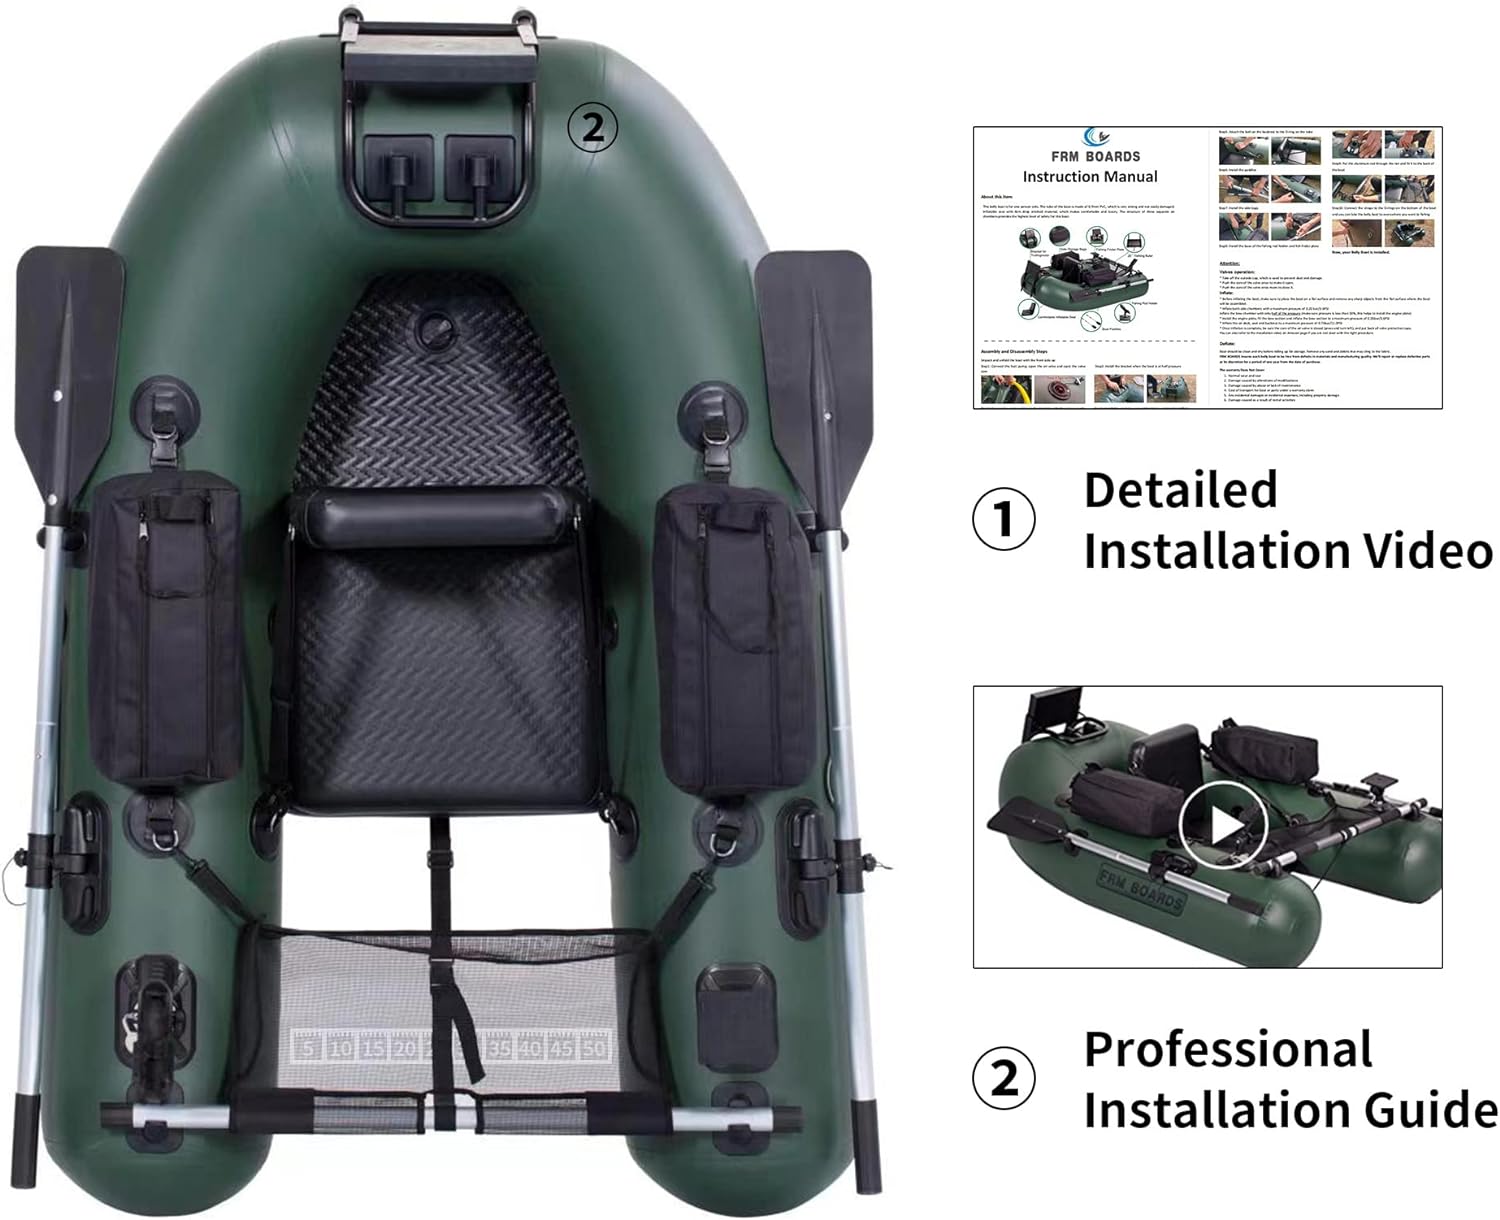 FRM BOARDS Inflatable Fishing Boat Belly Boat Fishing Float Tube with Storage Pockets, Adjustable Straps  Bracket for trolling Motor, Loading Capacity 400lbs - FRM BOARDS Inflatable Fishing Boat Belly Boat Fishing Float Tube With Storage Pockets Review